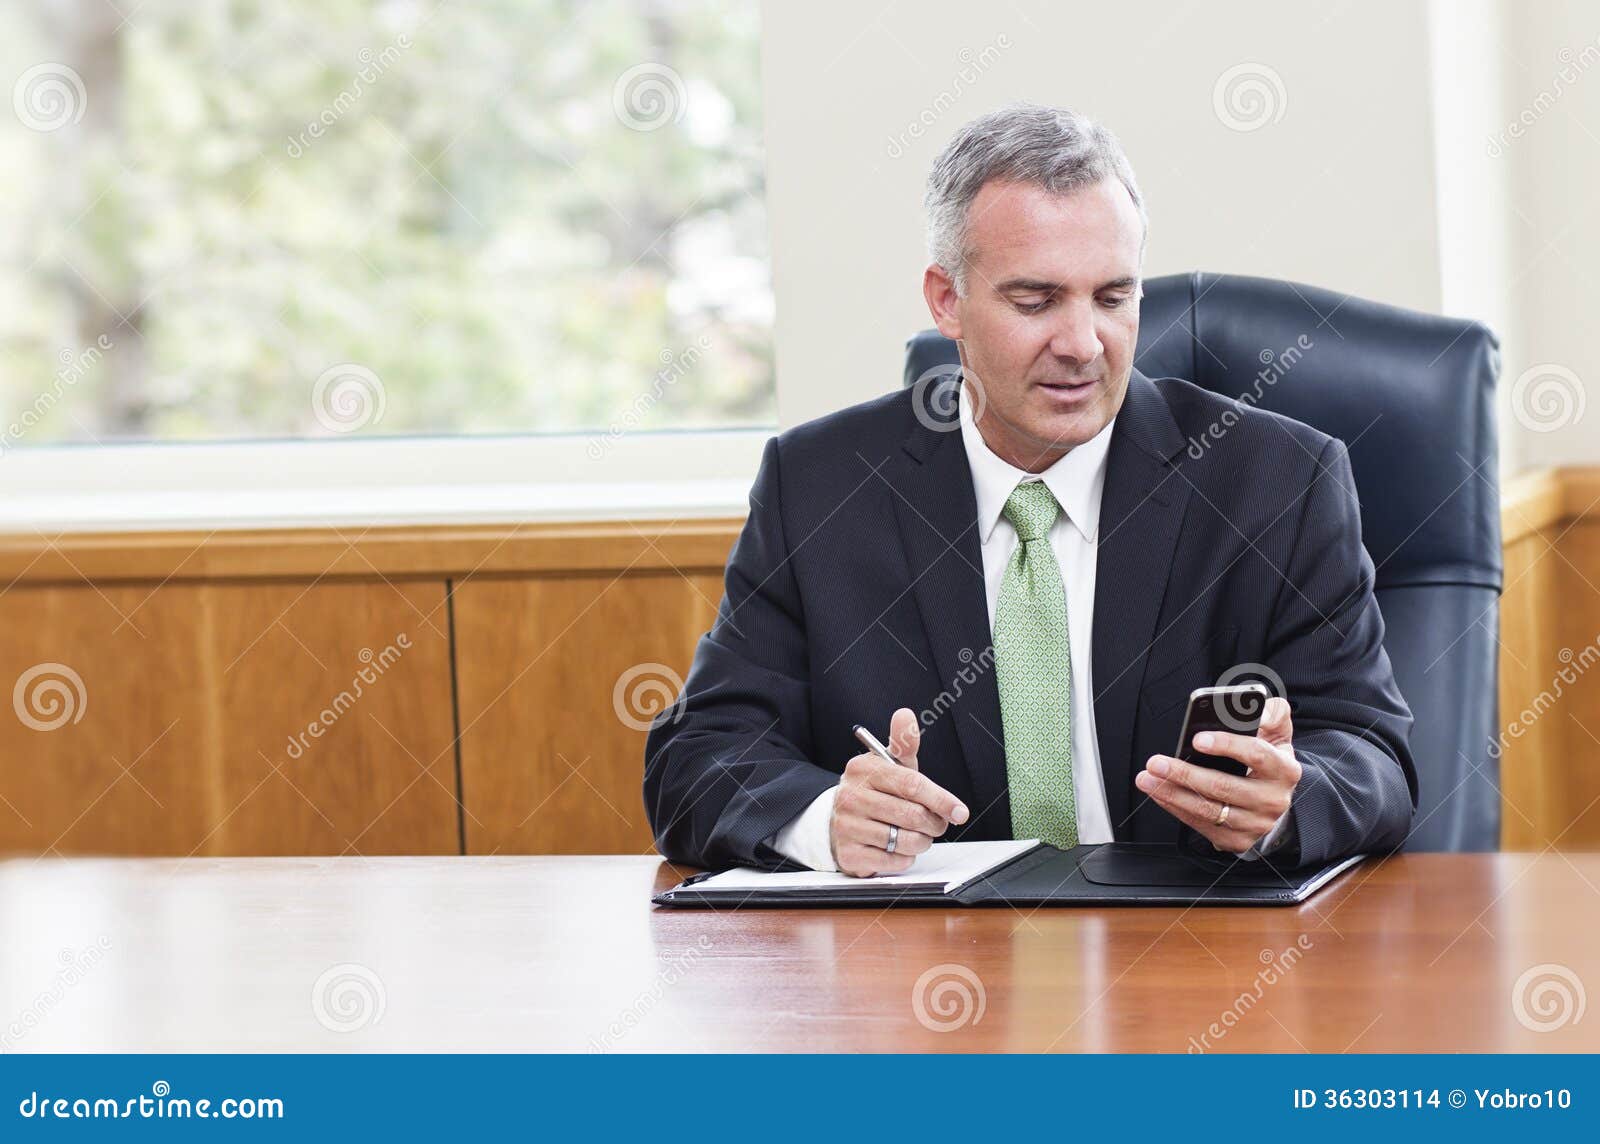 businessman reading text messages on his phone